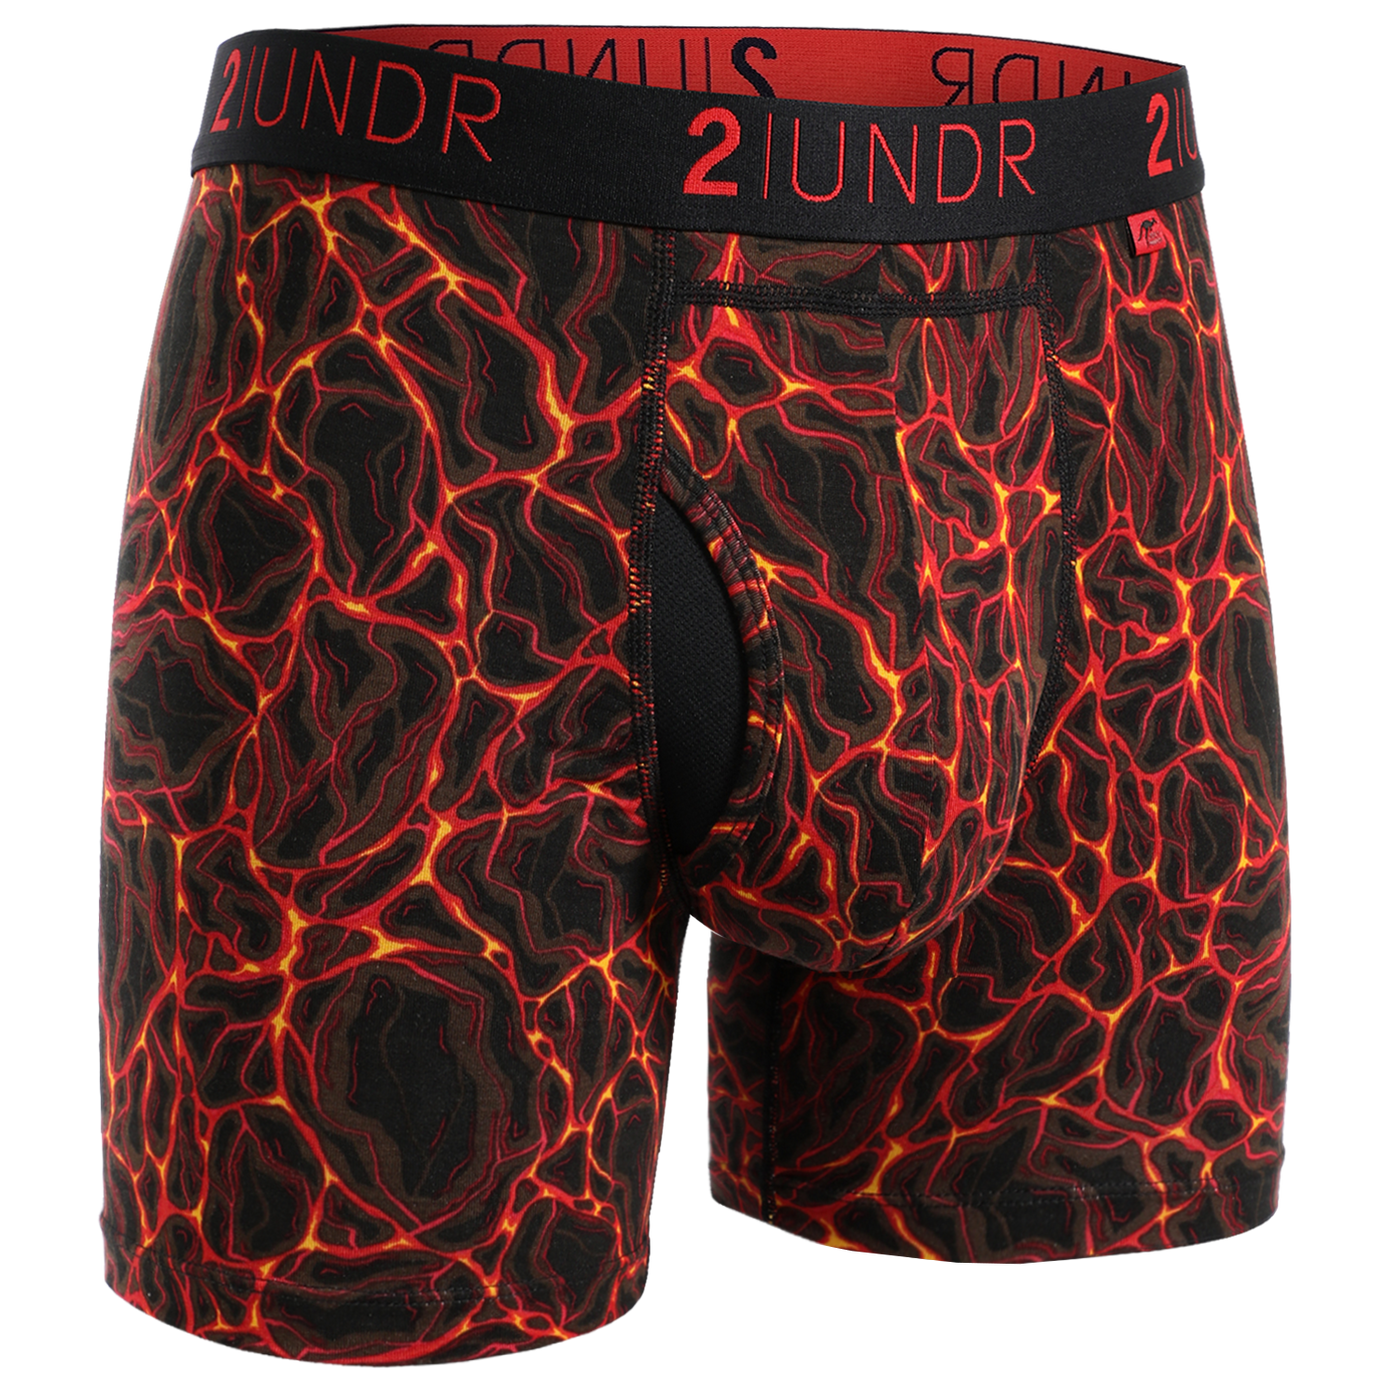 Swing Shift Boxer Brief  - Elements Collection - 3 Pack